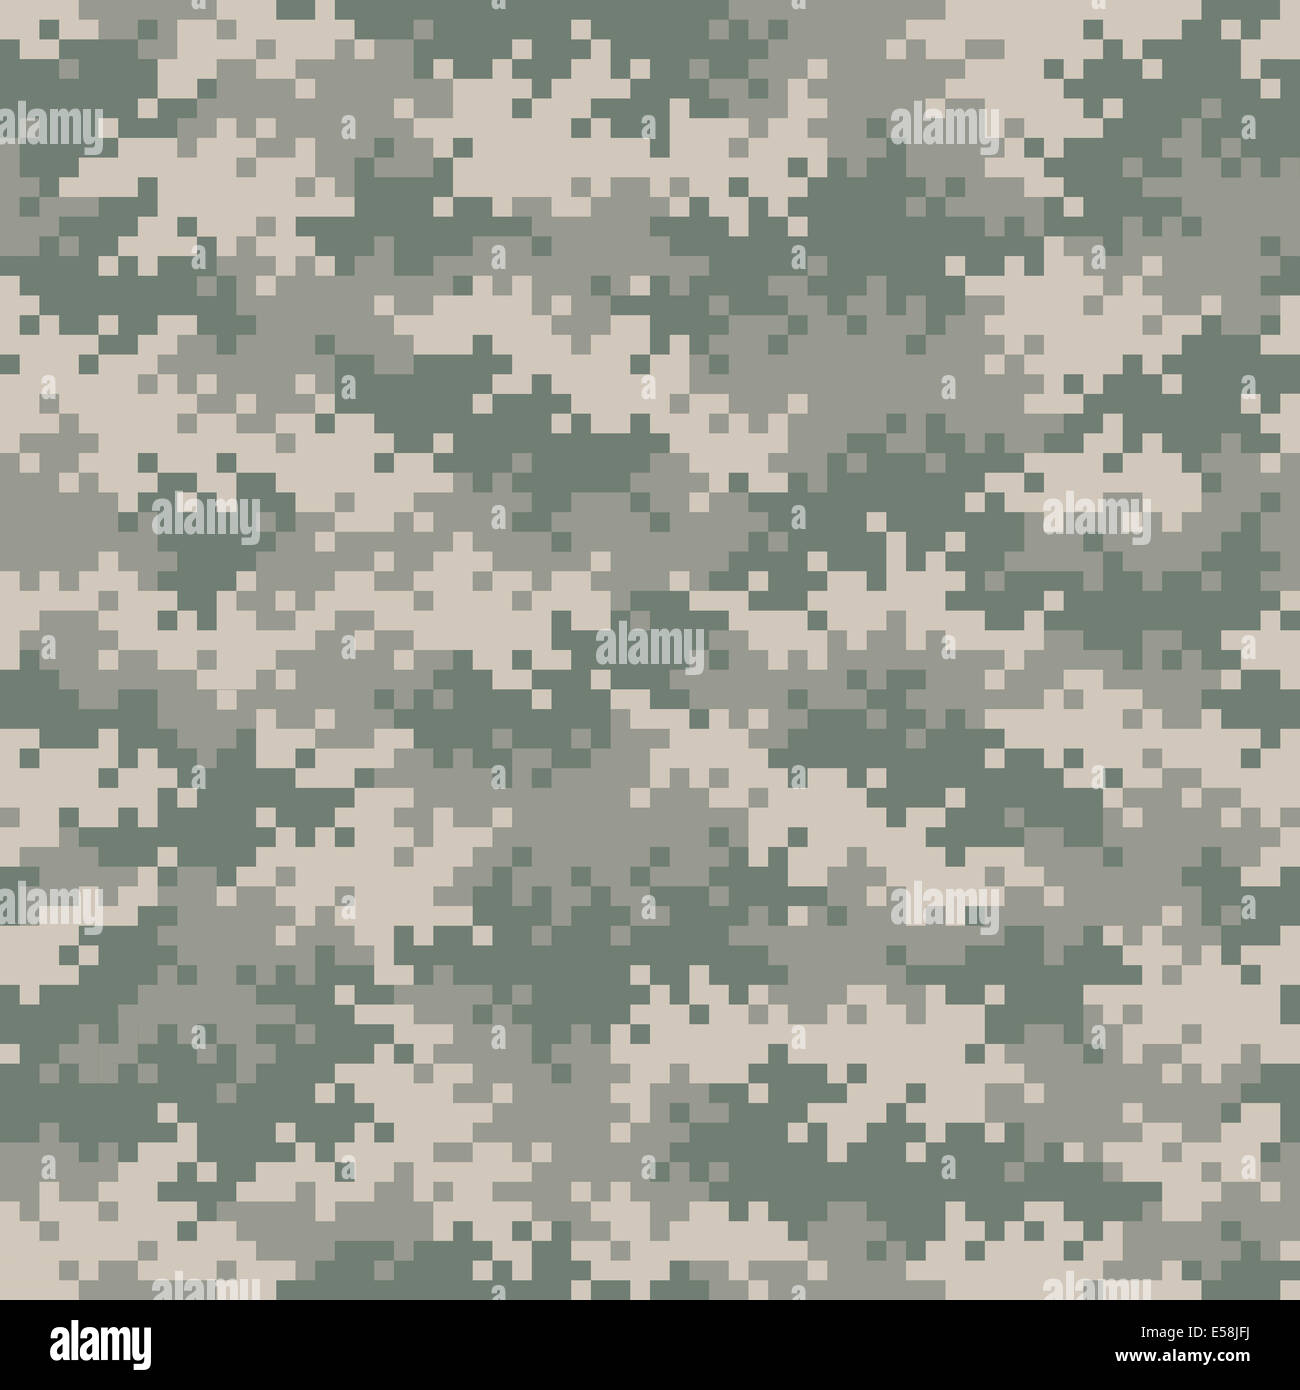 Military gray-green camouflage pixel pattern seamlessly tileable Stock Photo